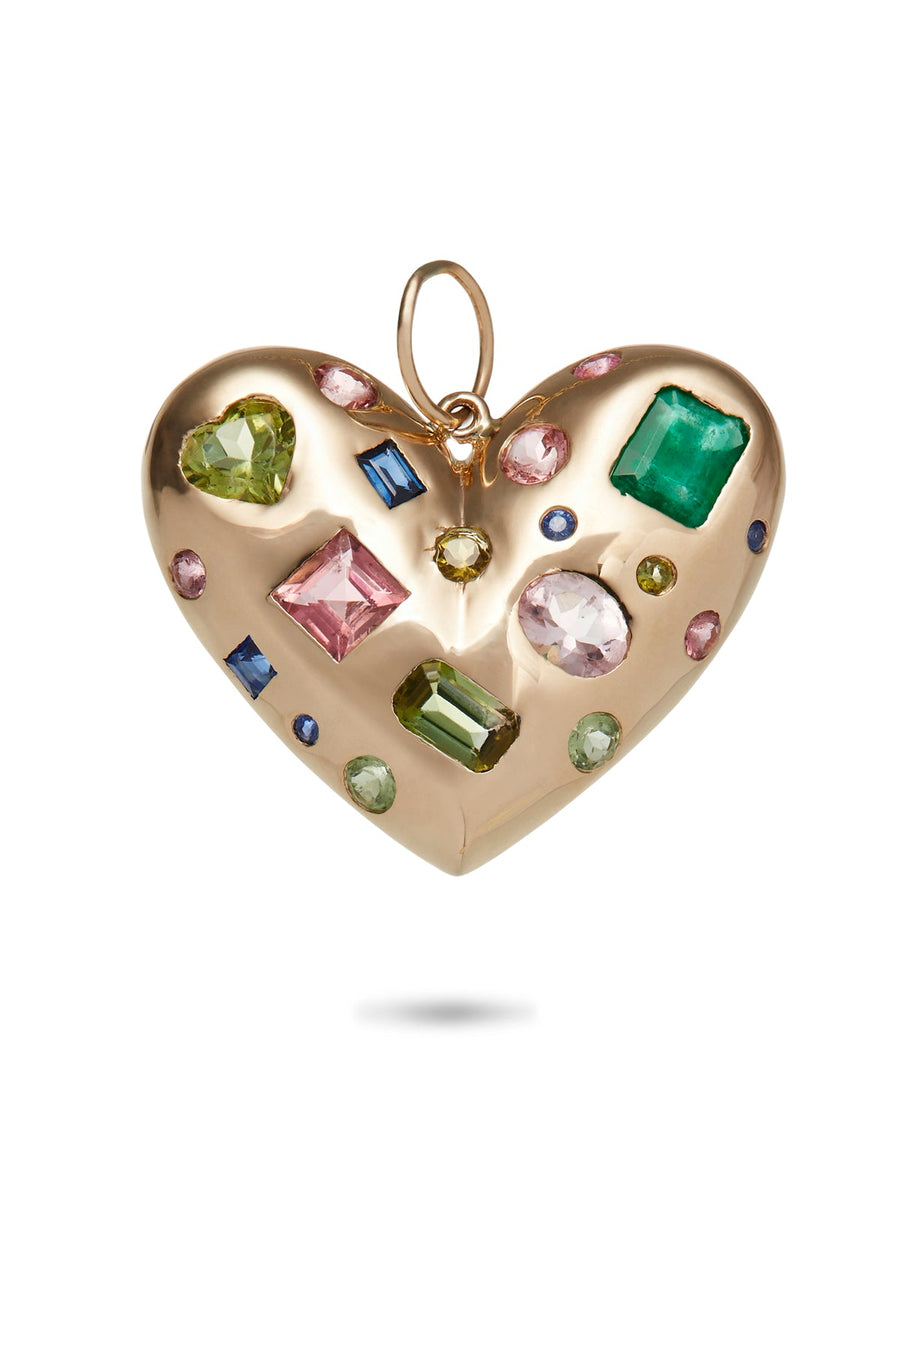 LARGE PUFFY HEART CHARM WITH SEMI PRECIOUS STONES